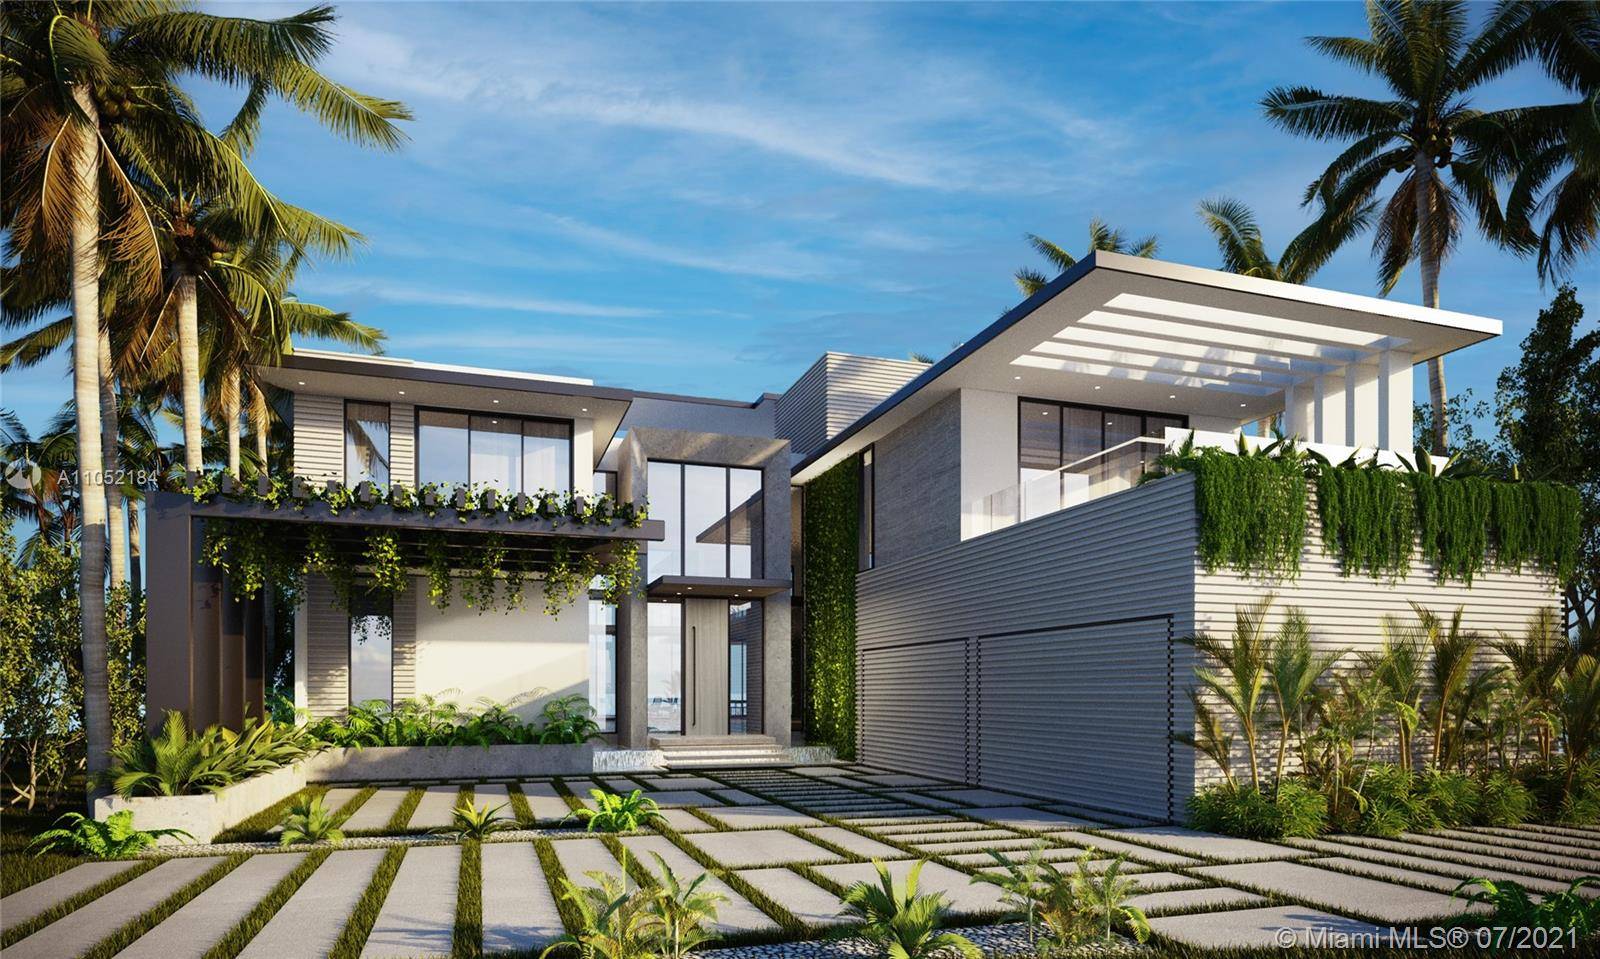 96' waterfront Tropical Modern architectural marvel arrives to one of the quietest streets of Miami Beach.